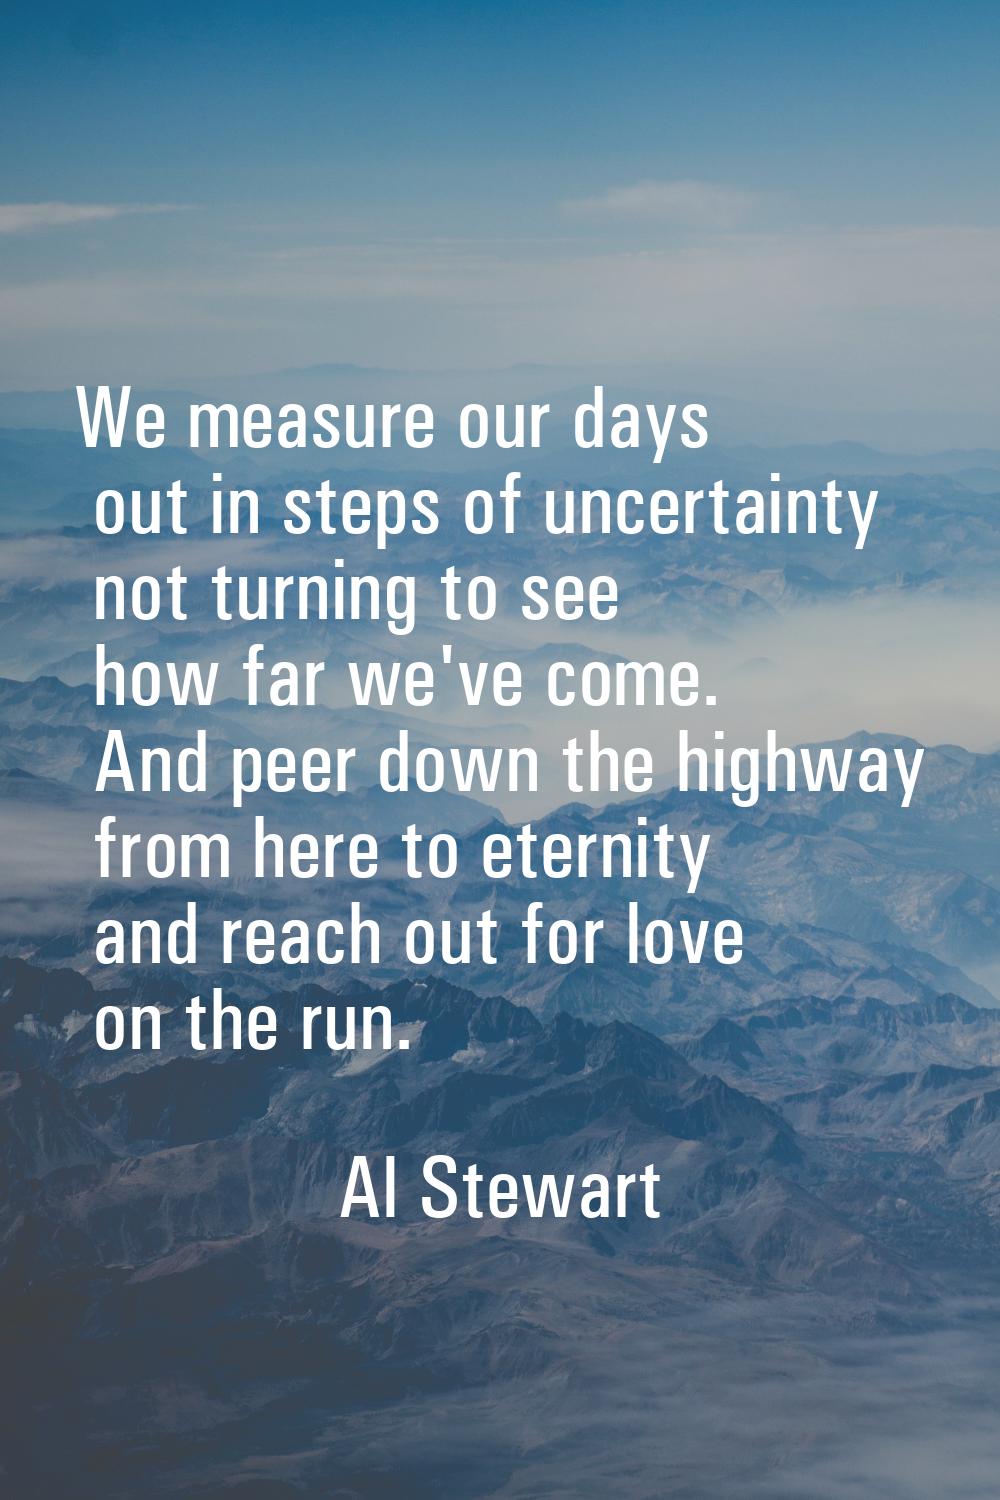 We measure our days out in steps of uncertainty not turning to see how far we've come. And peer dow